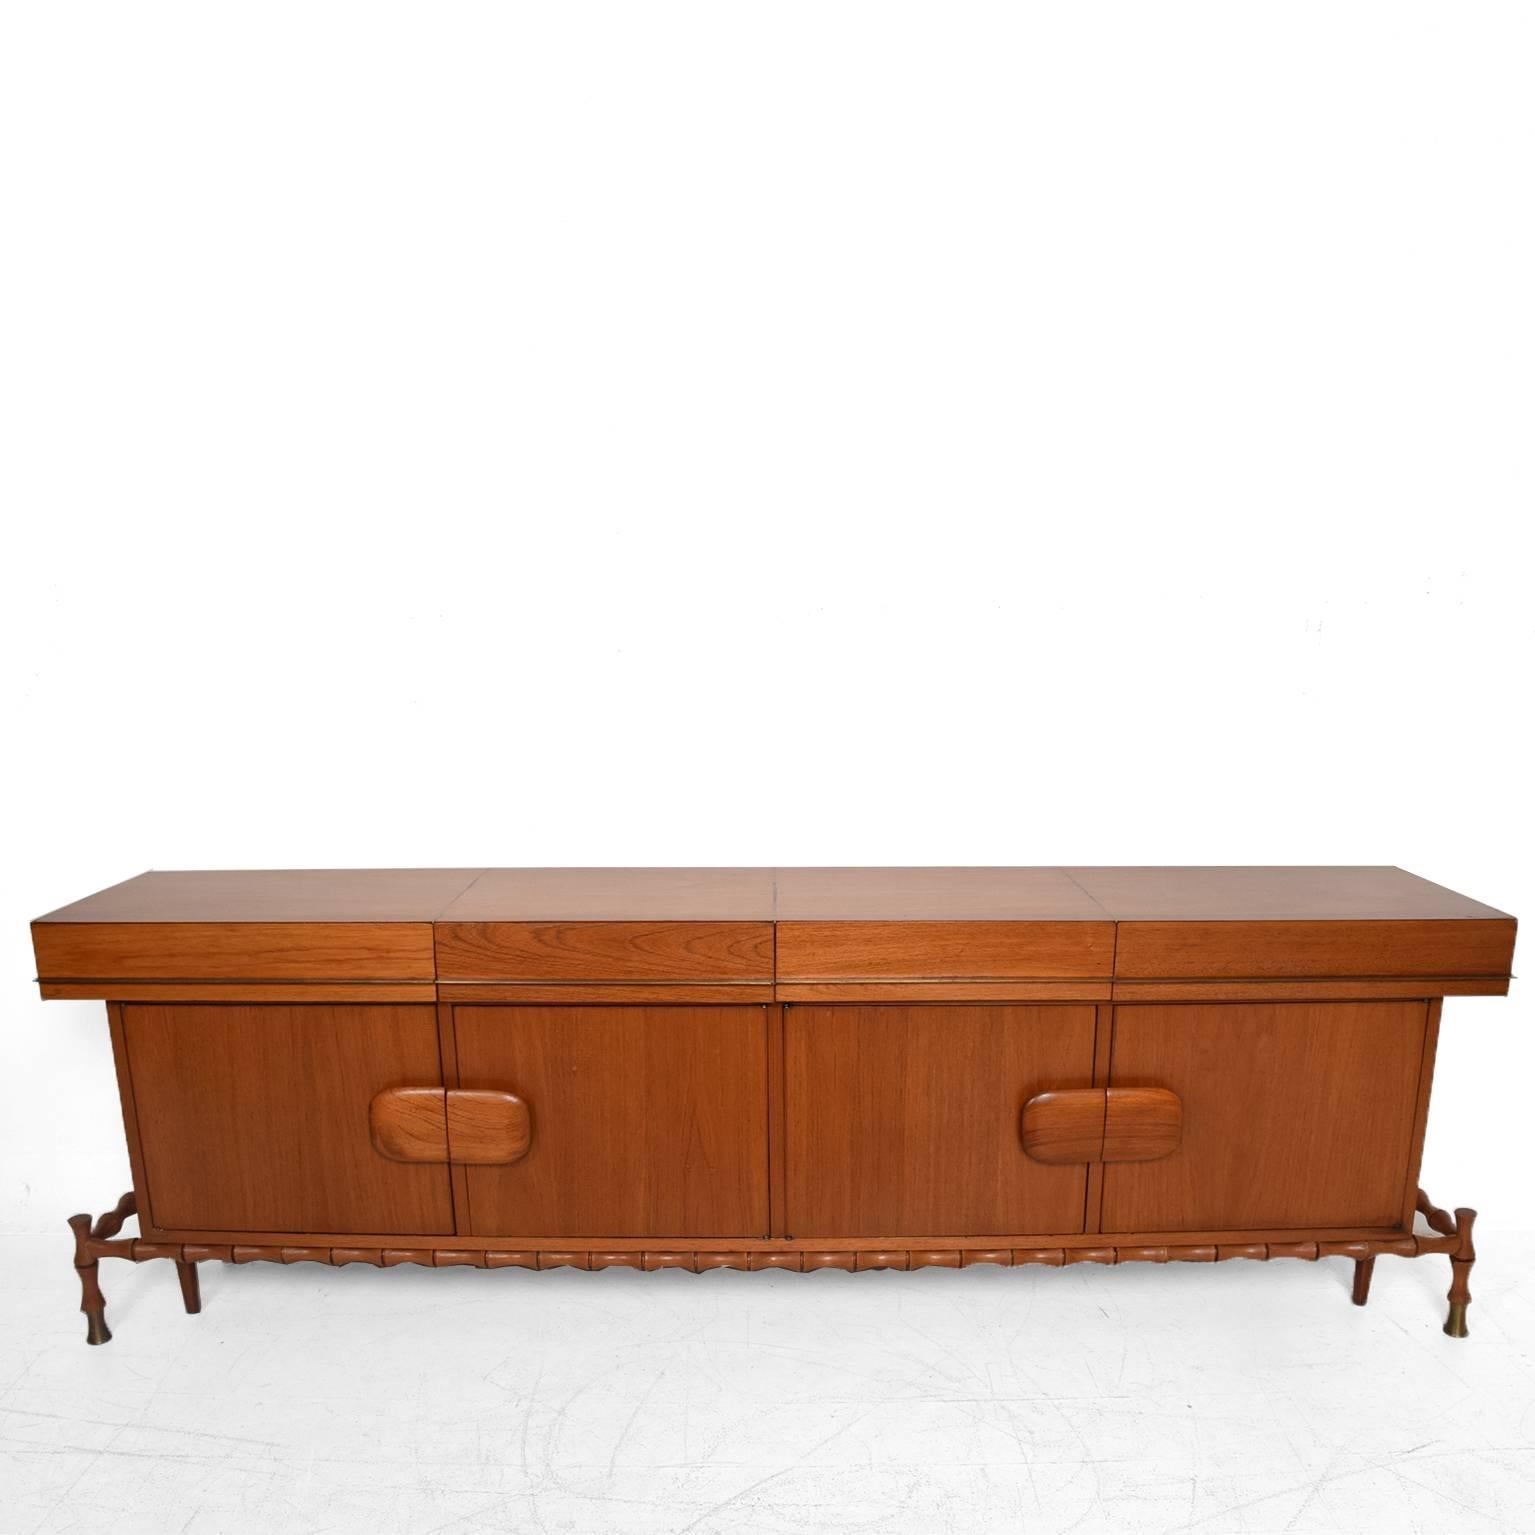 For your consideration a beautiful floating credenza.
(Beautiful faux bamboo details).
Made of Mexican Mahogany and brass.
circa 1960s.
by Frank Kyle.
Unmarked no signature from the maker.
Dimensions: 35” H x 106” W x 20” D.